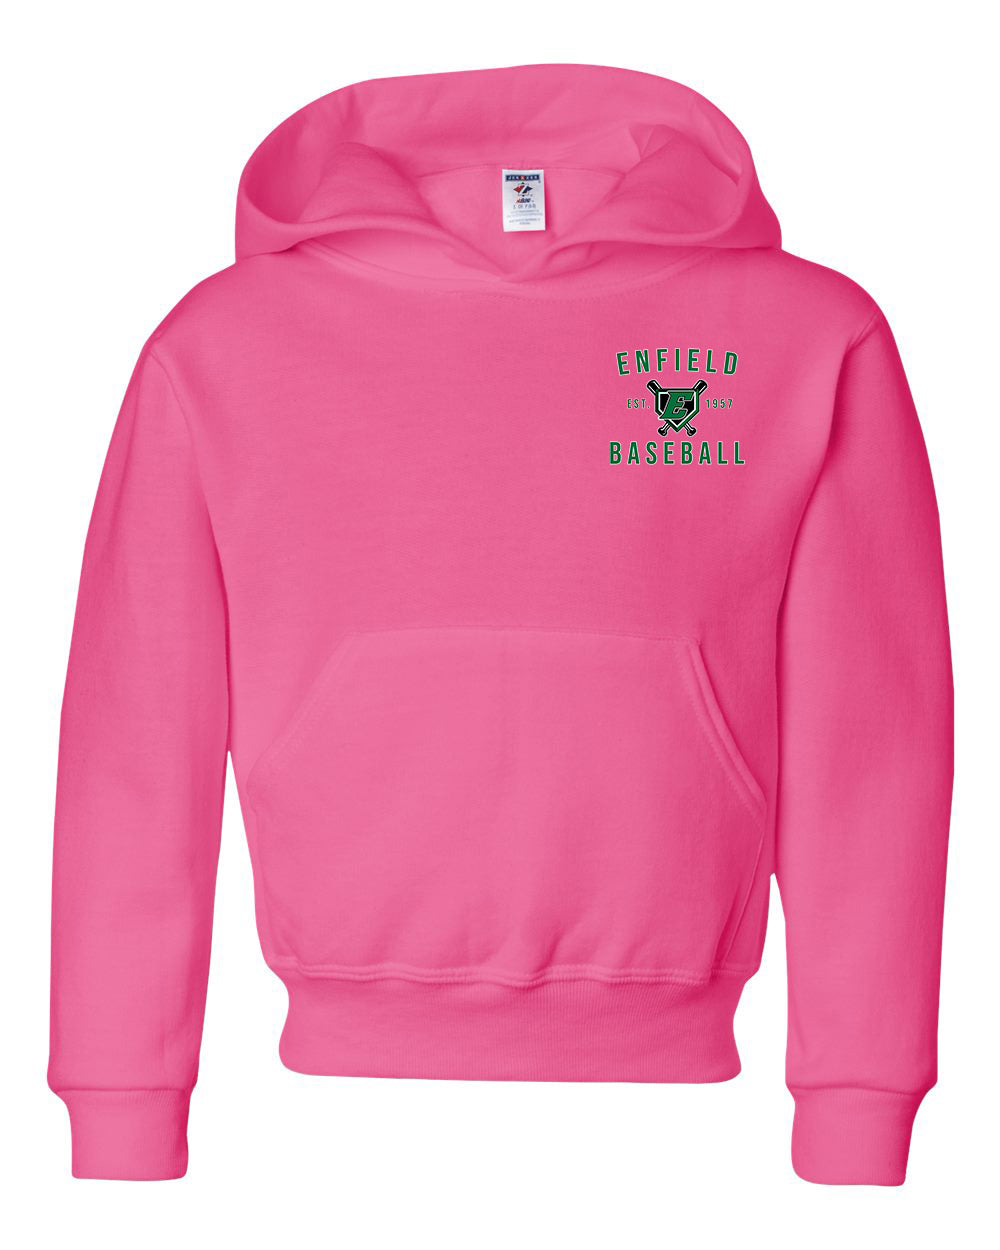 ELL Youth Hoodie "EST Corner" - 996Y (color options available)